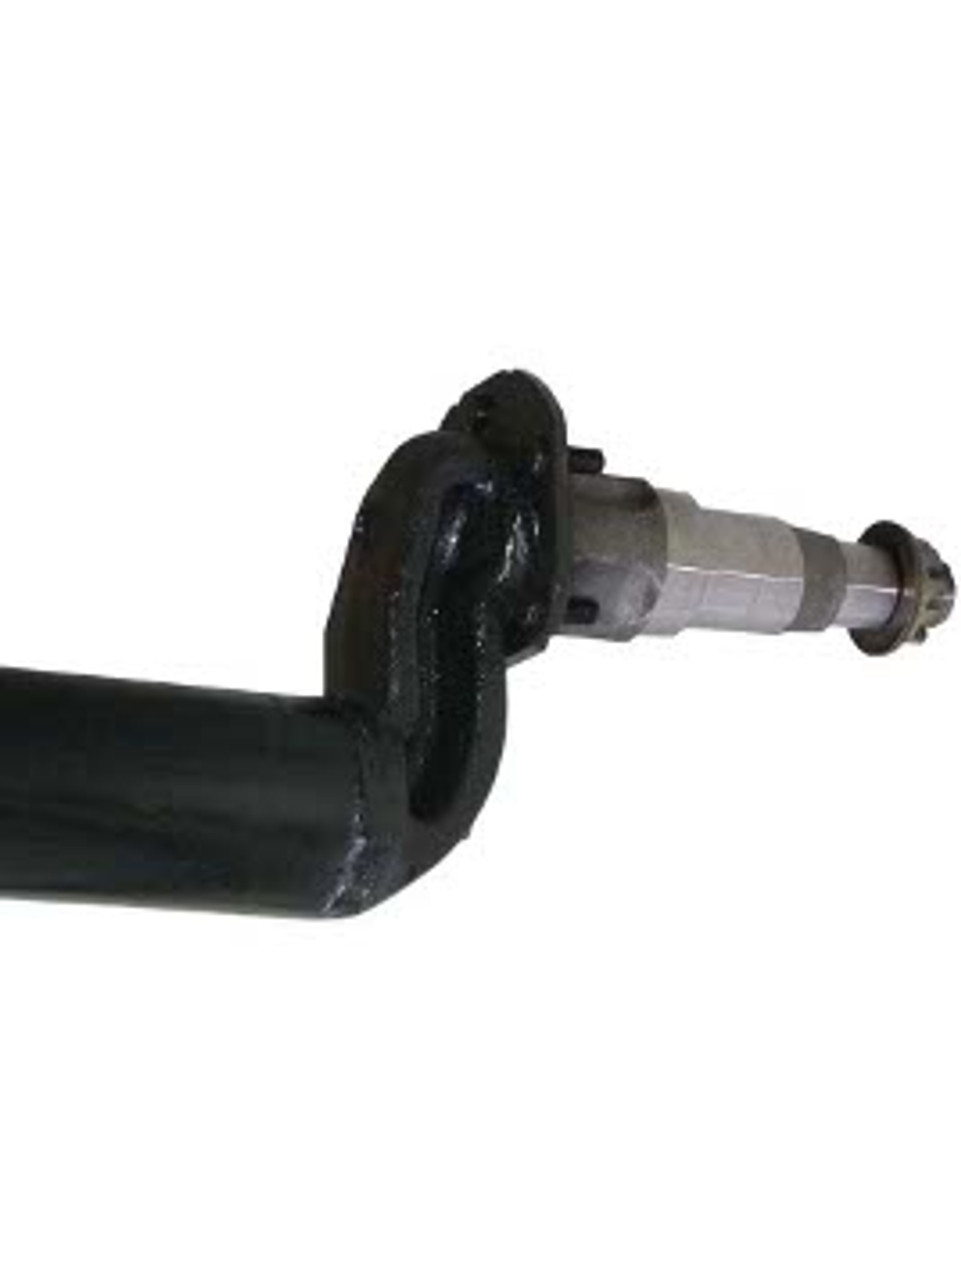 DRT6095-42FS --- 3" Round Dexter  Axle with 4" Drop  - 6,000/7,000 lb Capacity - 95" Hub Face